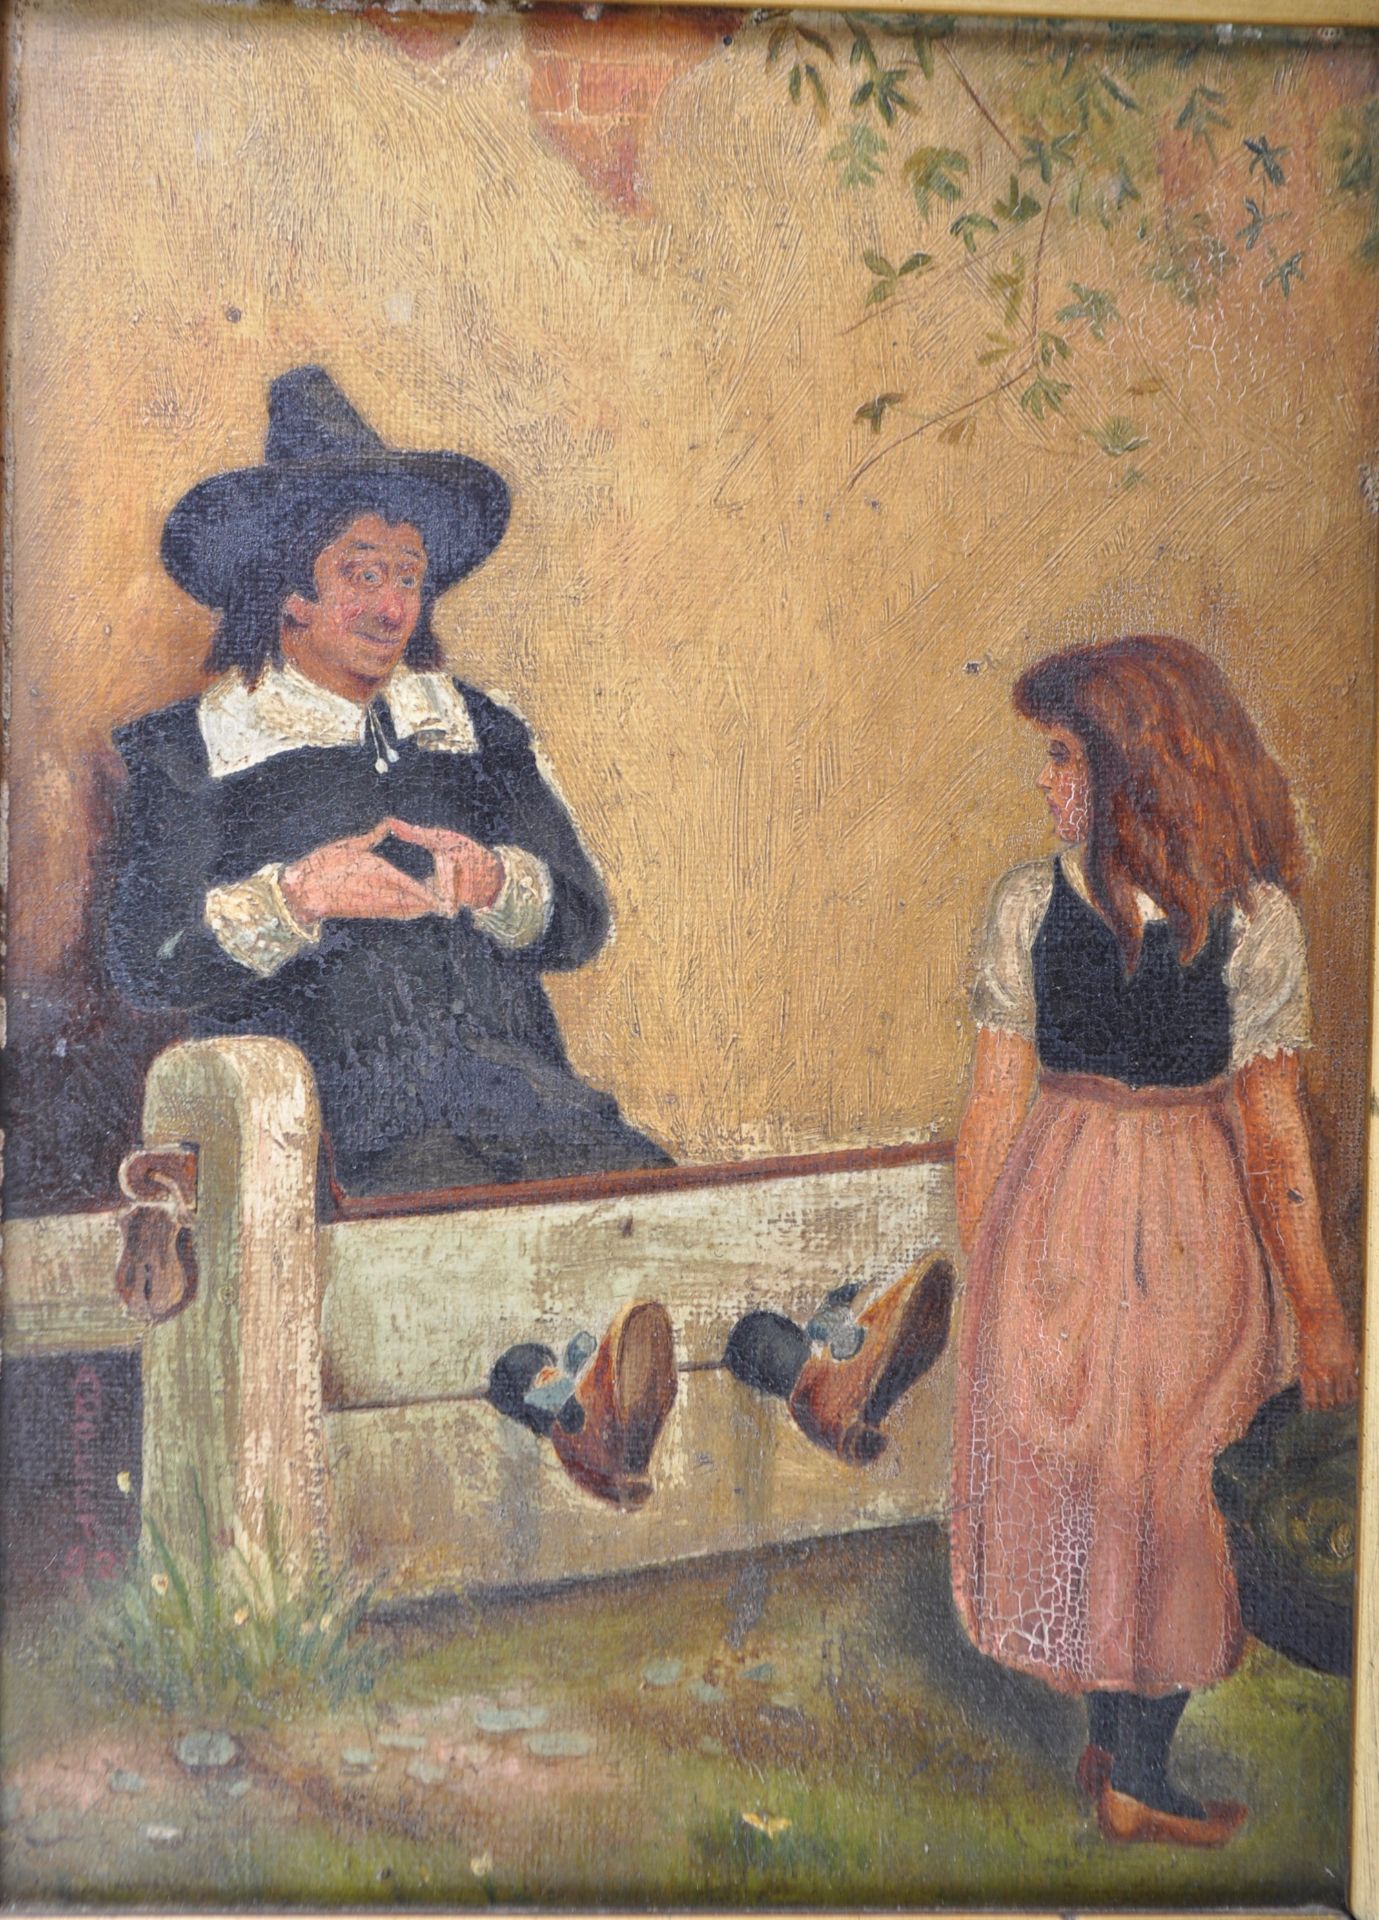 19TH CENTURY OIL ON BOARD PAINTING DEPICTING A QUAKER IN STOCKS - Image 2 of 4